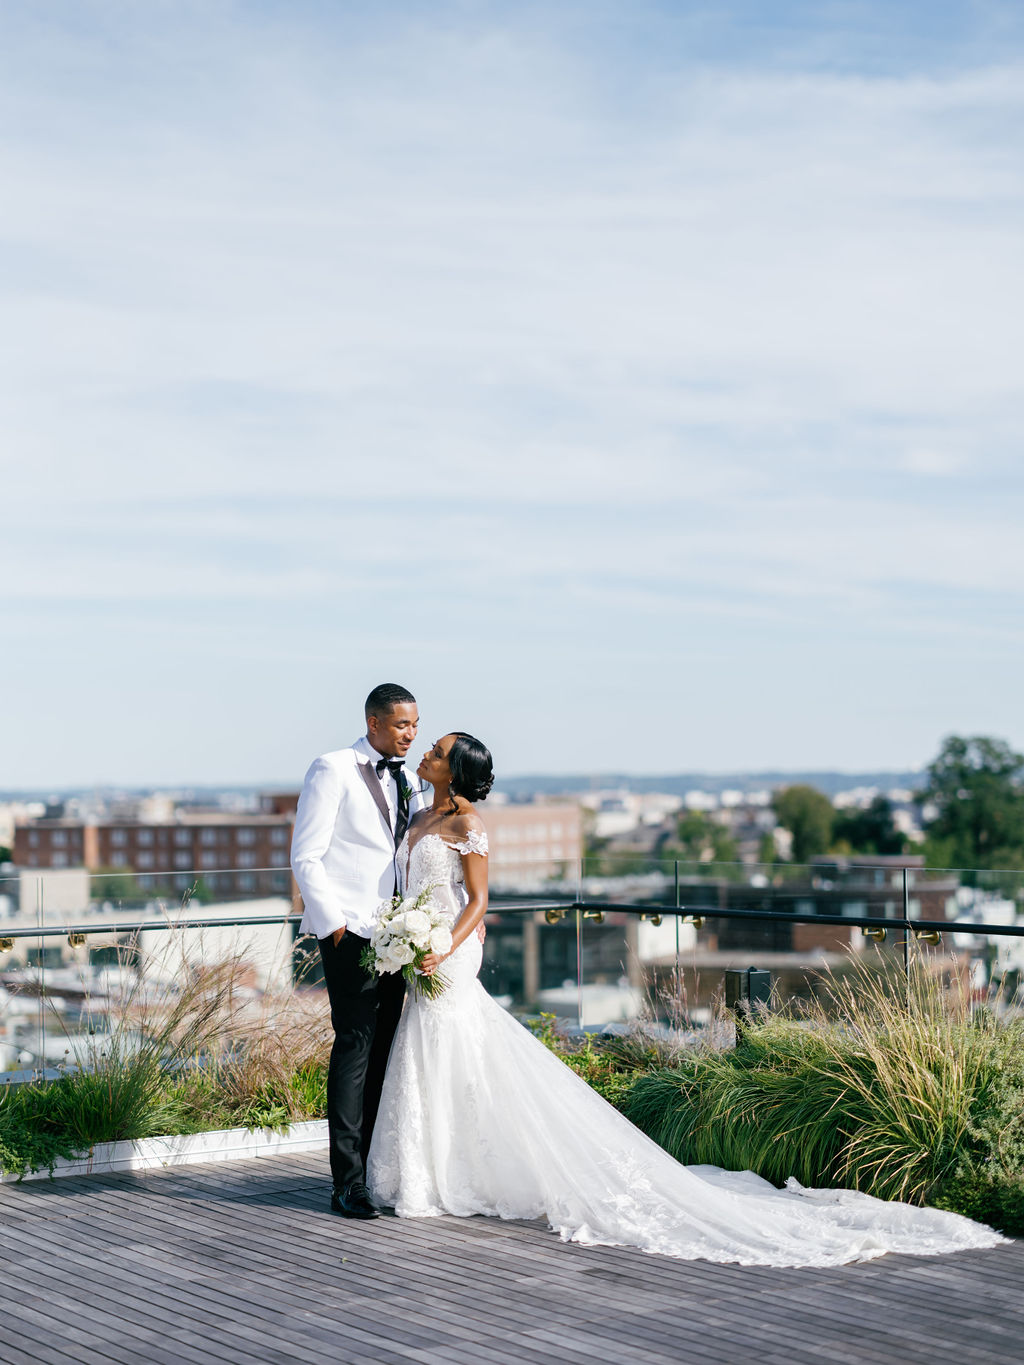 Sophisticated D.C. Wedding with Perfect Blue & White Wedding Shoes